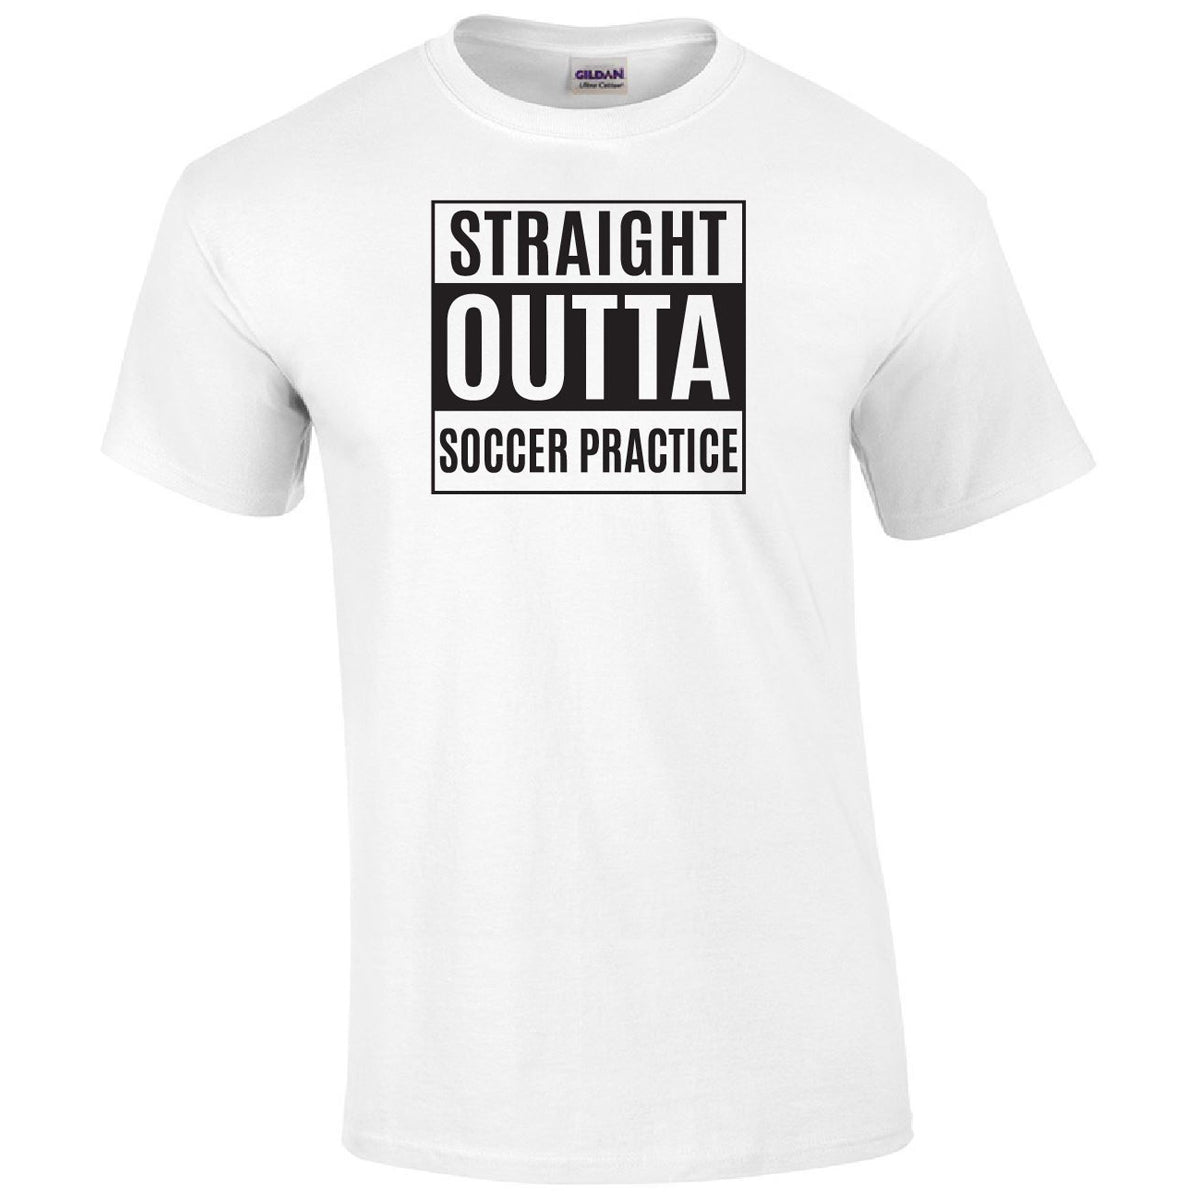 Straight Outta Soccer Practice Printed Tee Humorous Shirt 411 Youth Medium White 